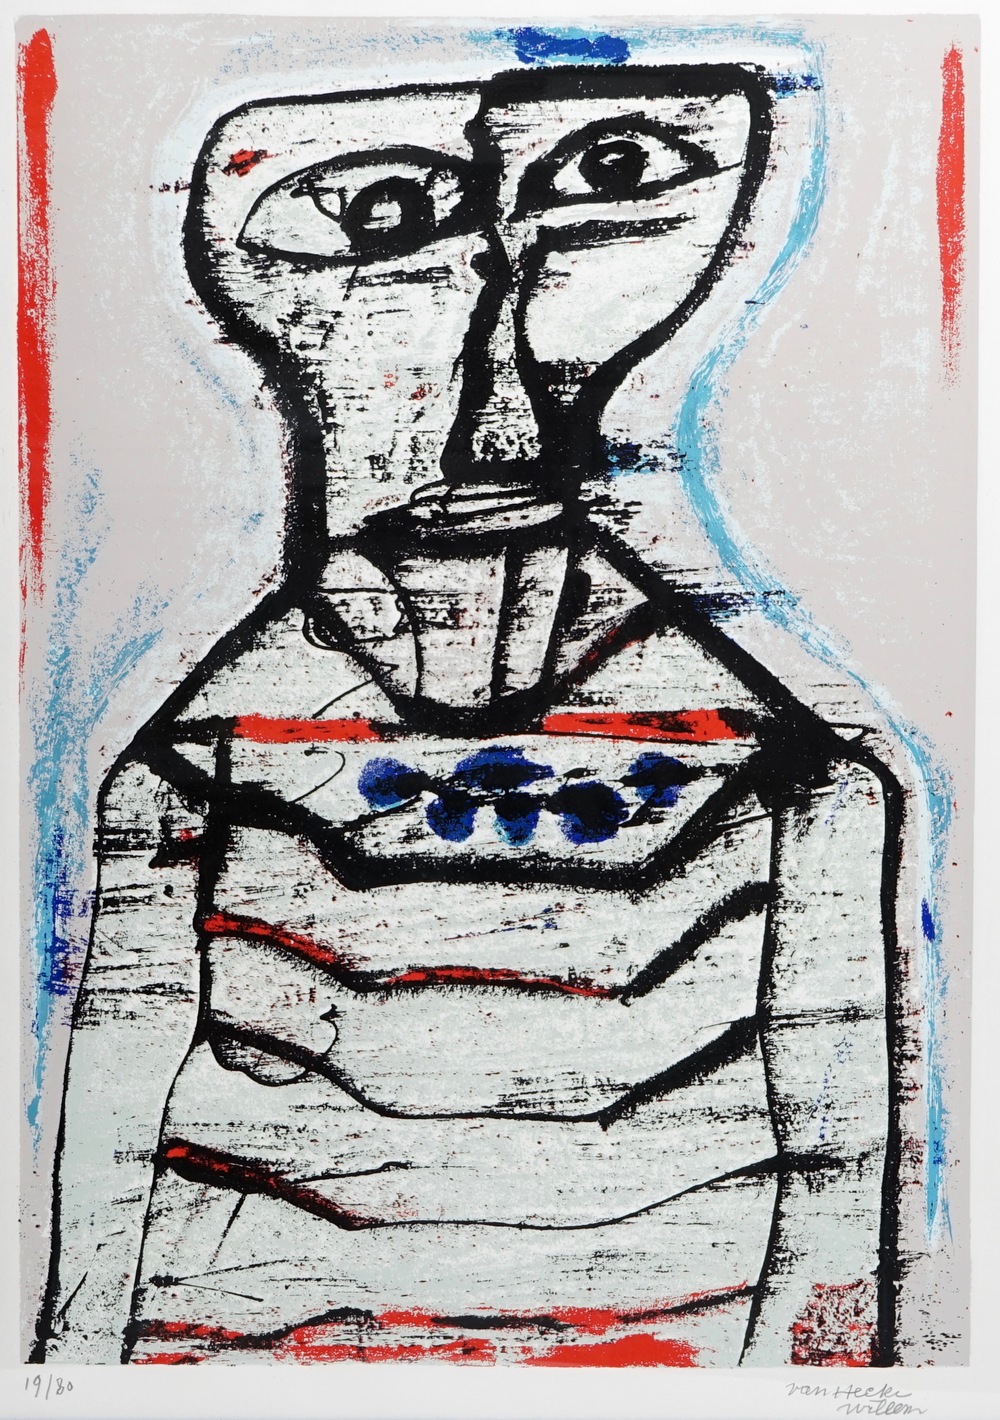 Van Hecke, Willem (Belgium, 1893-1976), Abstract portrait, lithography on paper, numb. 19/80